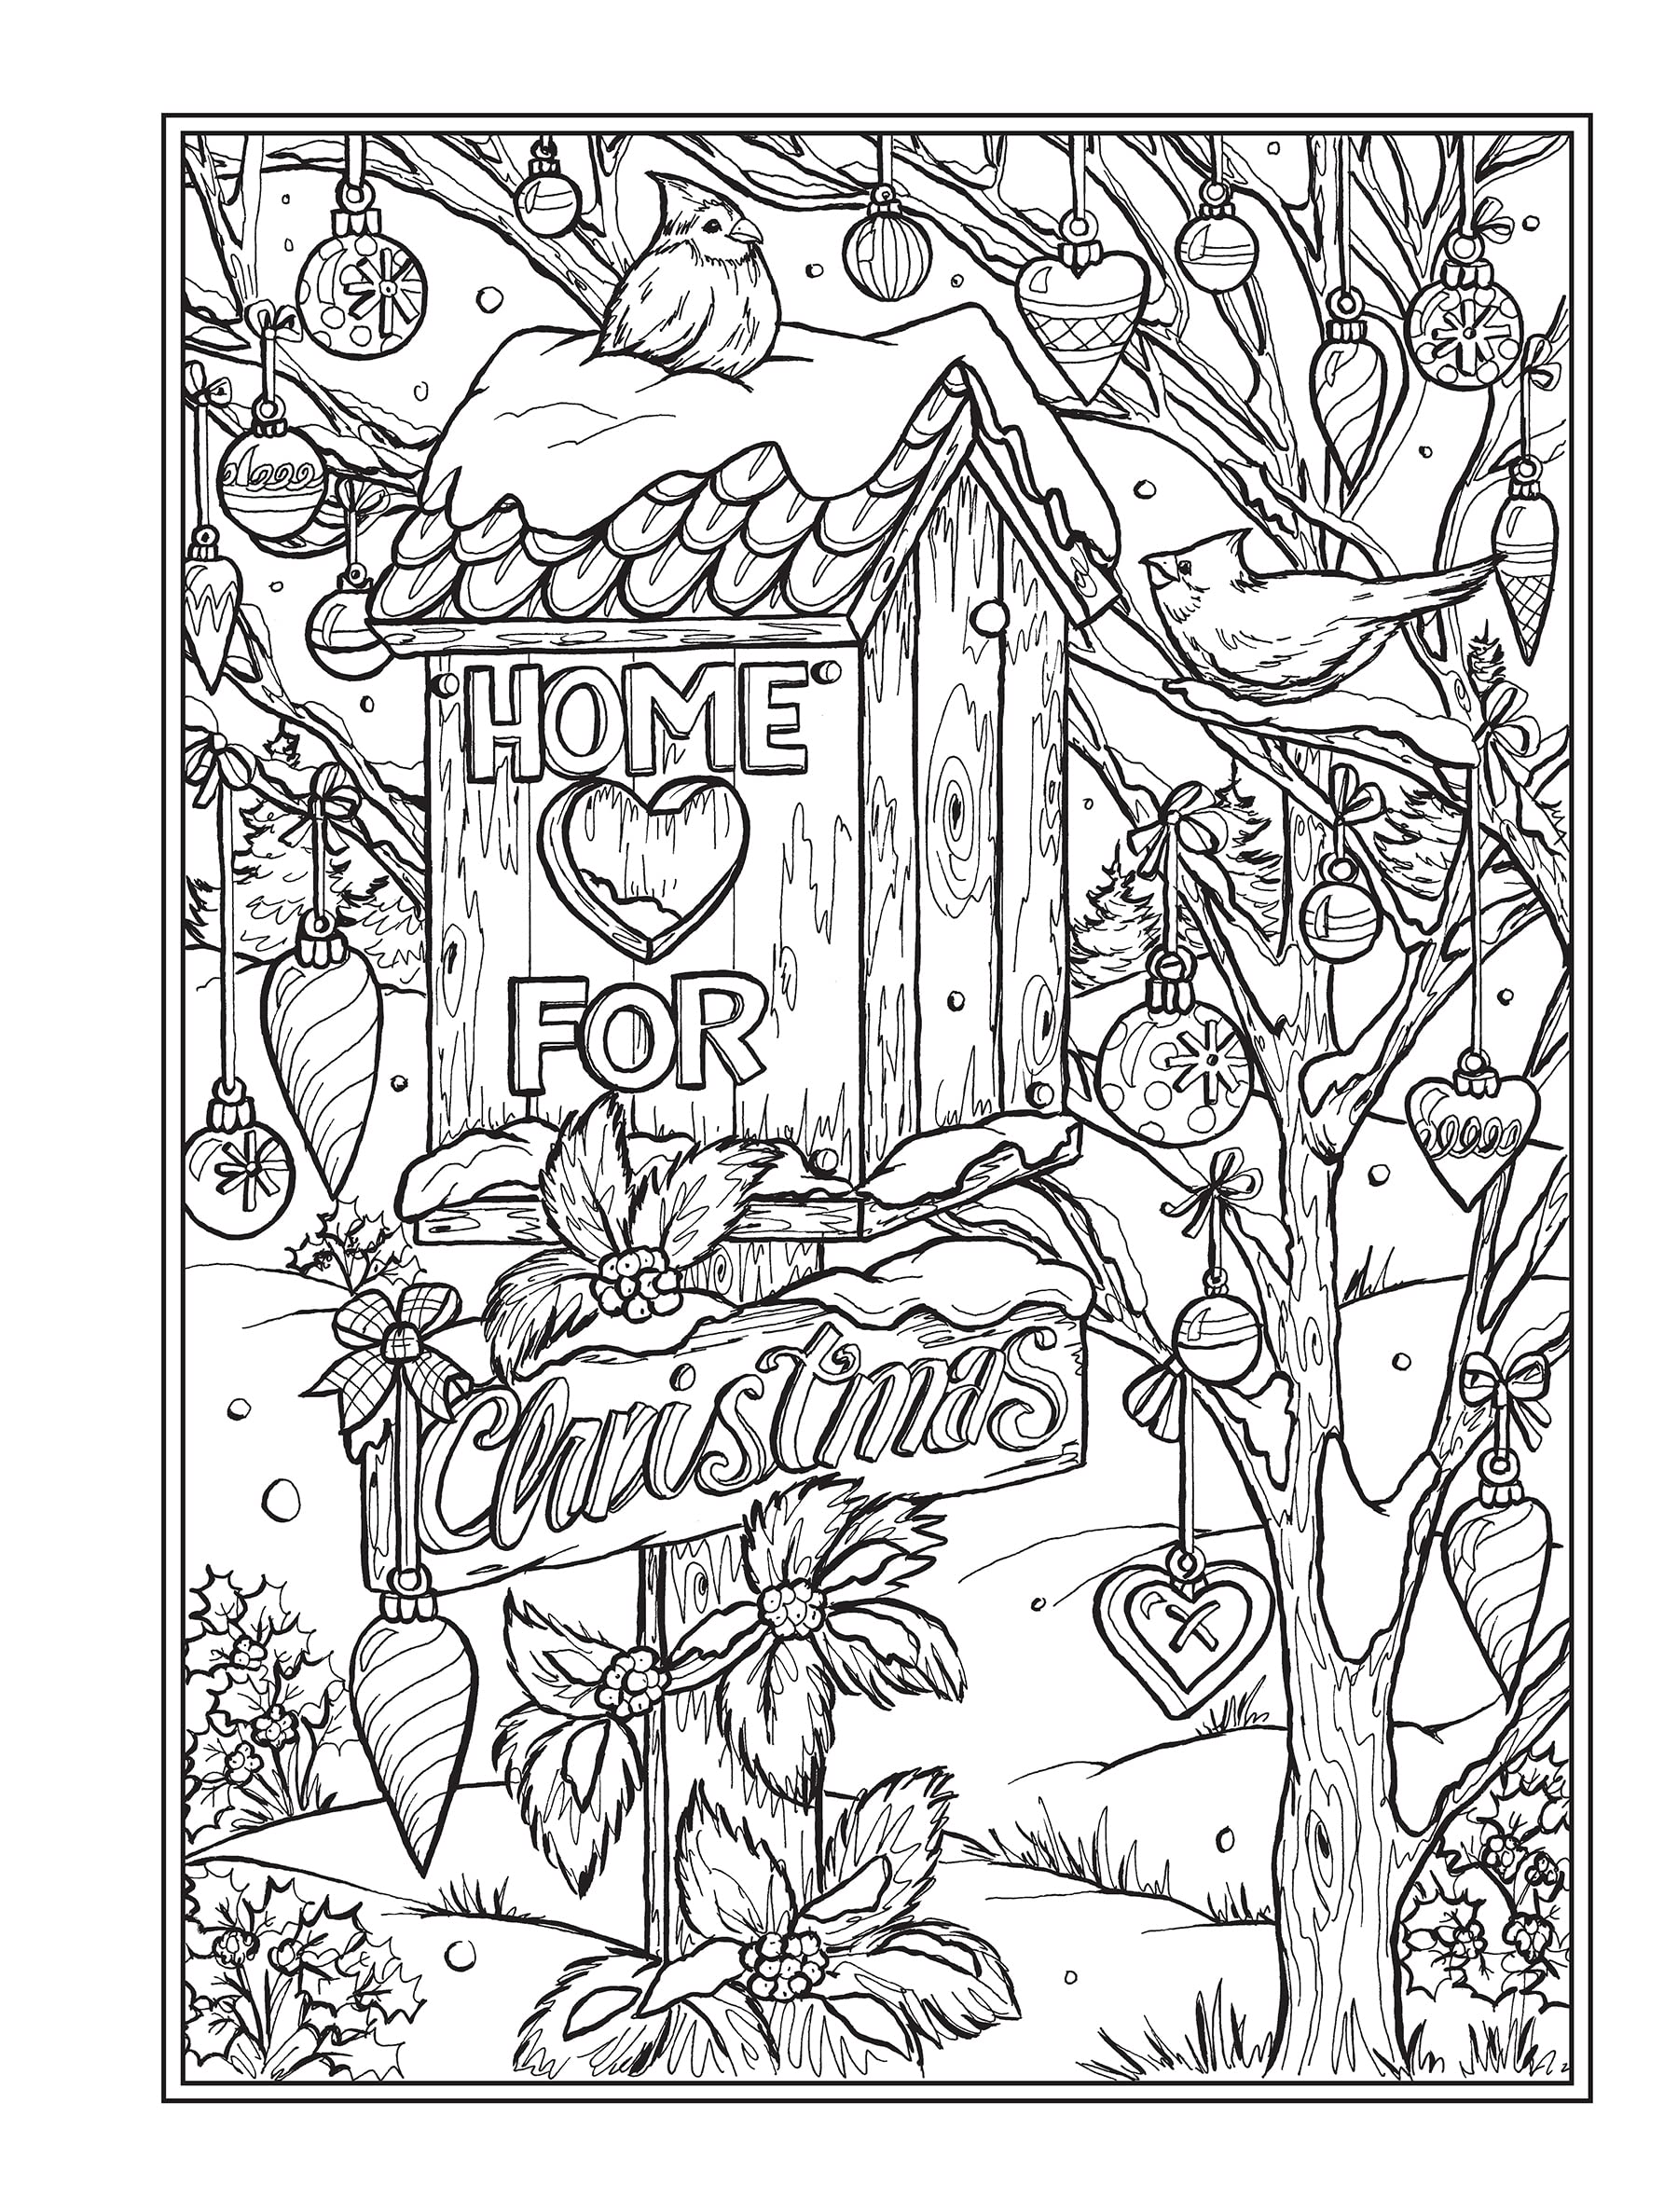 Creative haven home for the holidays coloring book creative haven coloring books creative haven coloring books holiday coloring book abstract coloring pages